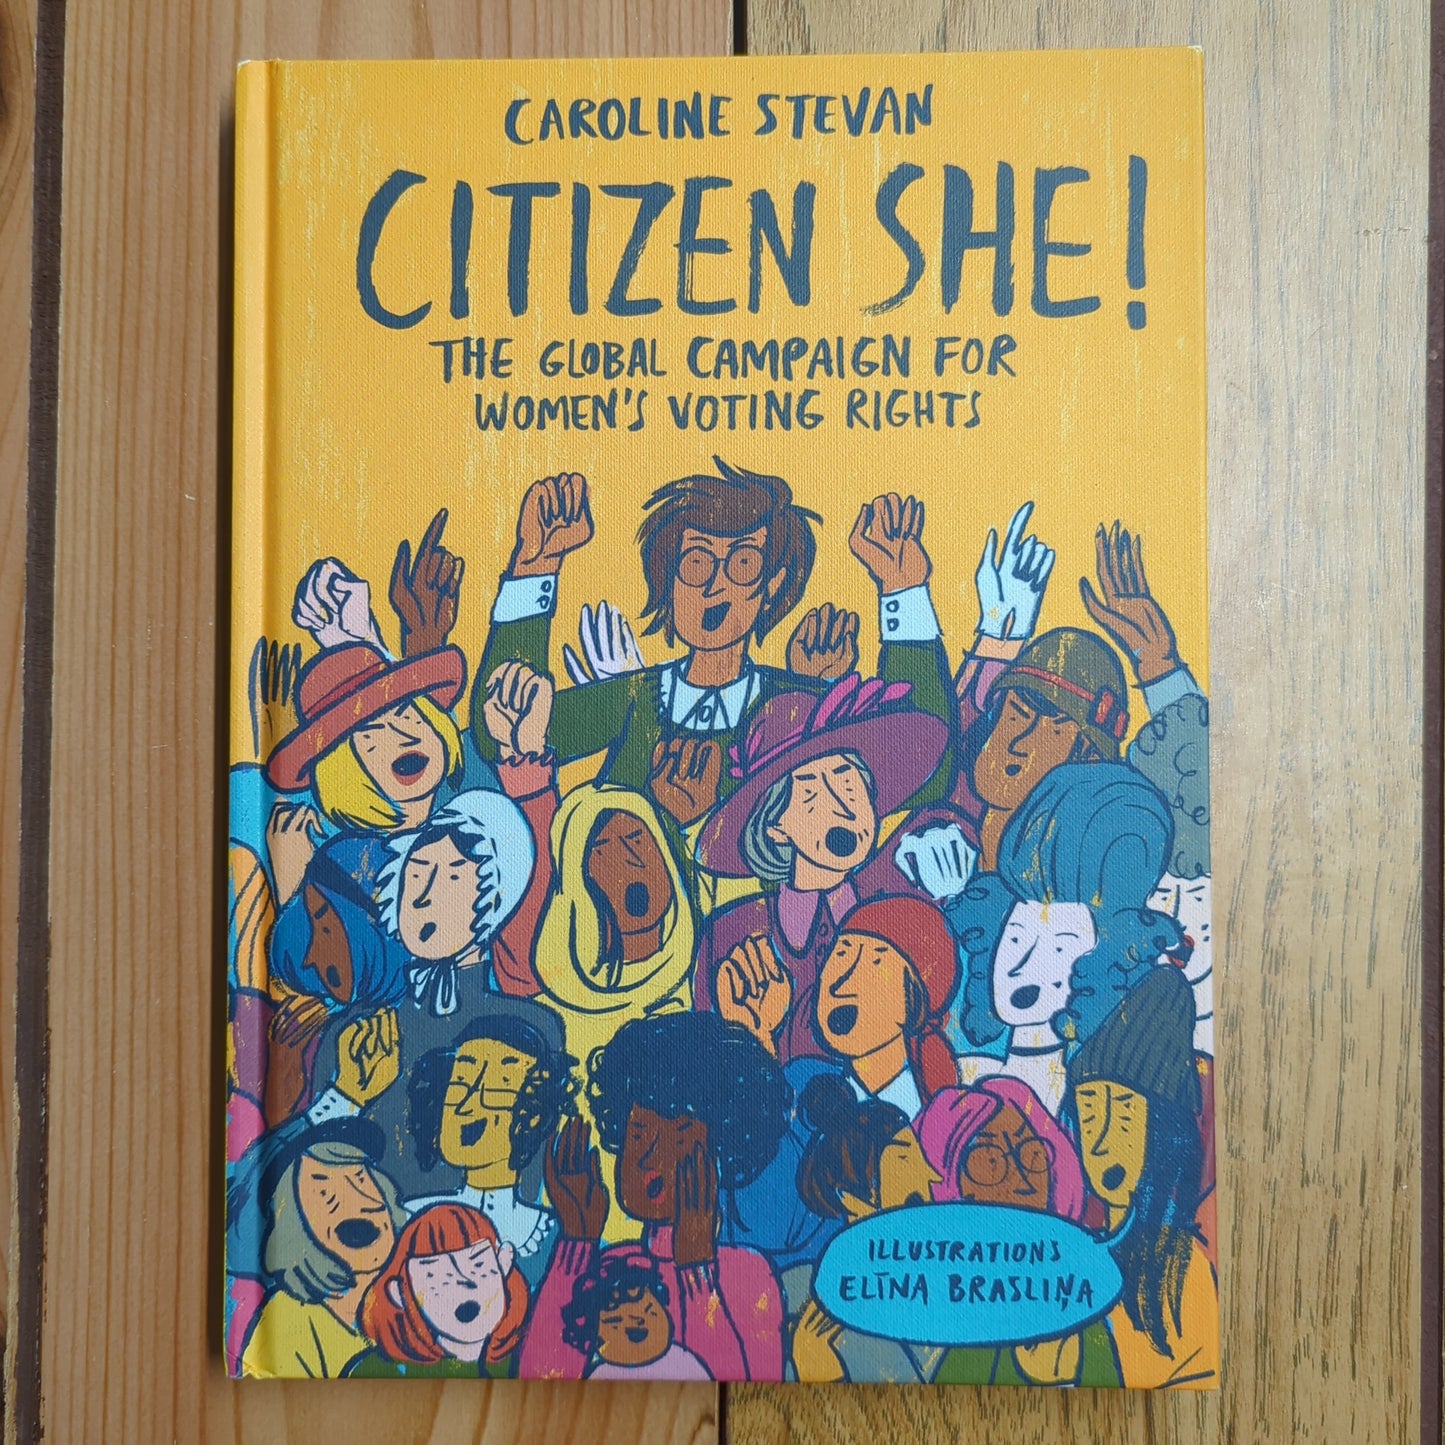 Citizen She! The Global Campaign for Women's Voting Rights